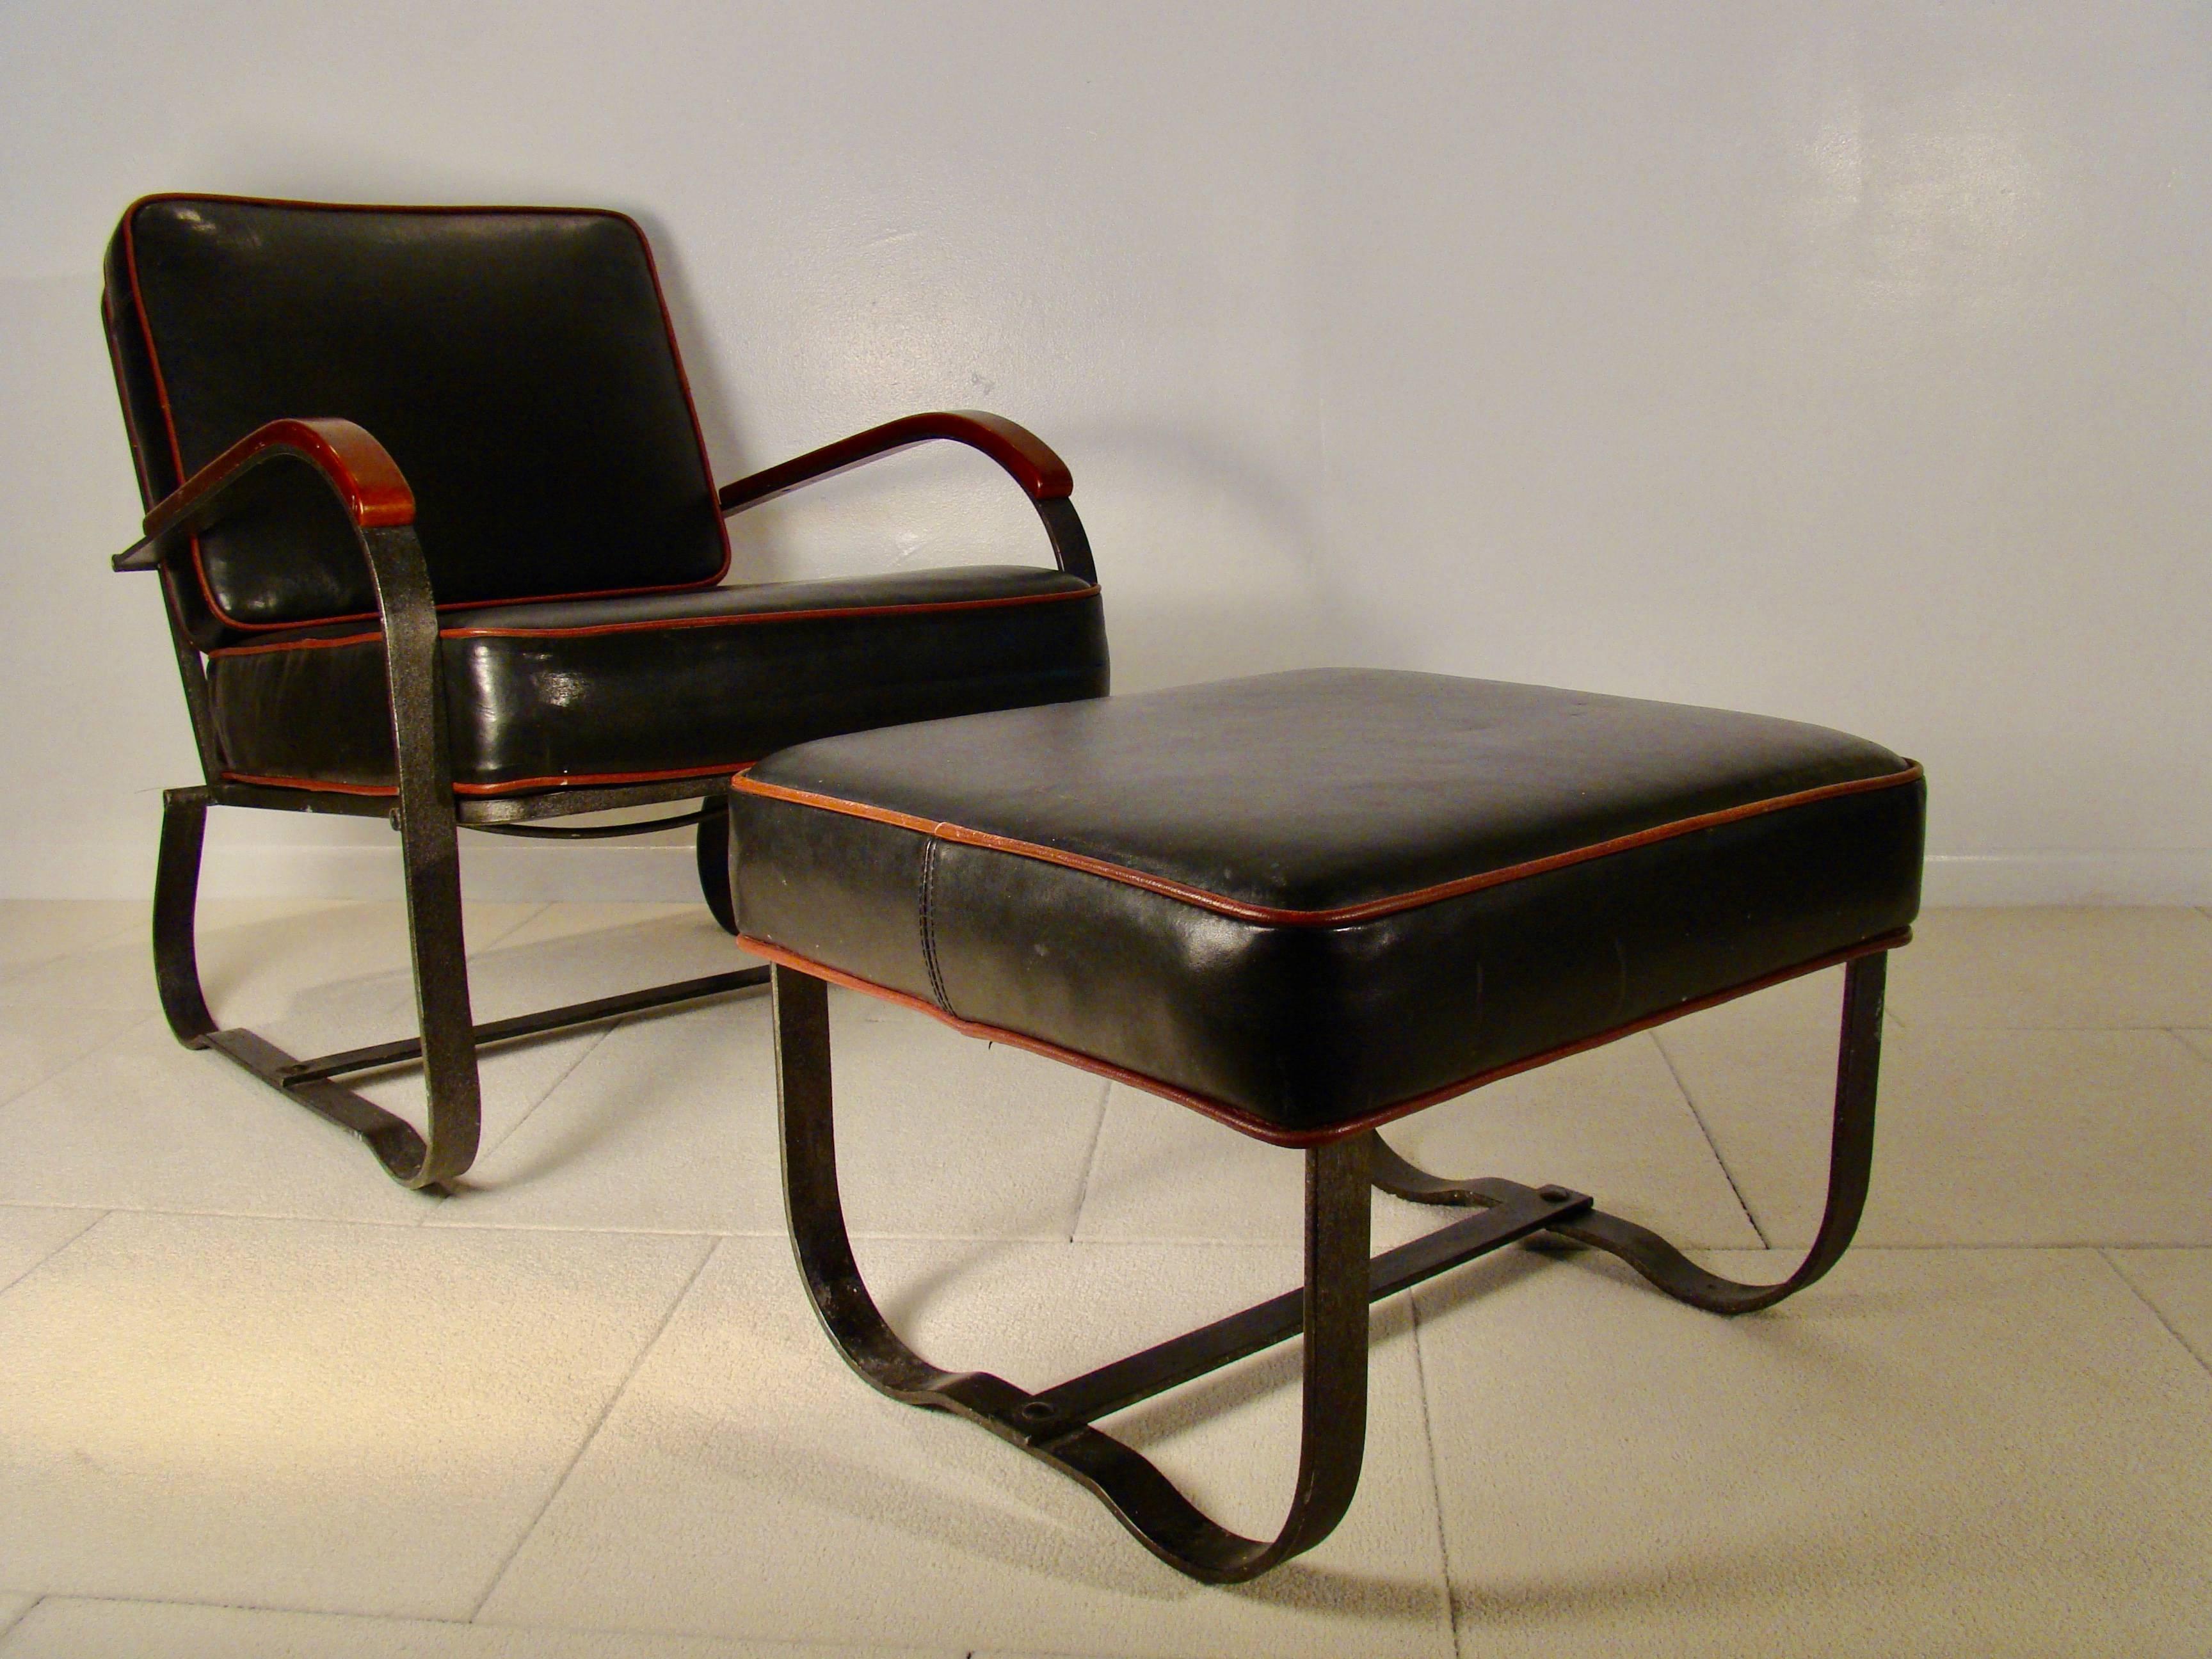 American Elusive Art Deco Machine Age Steel Lounge Chair and Ottoman by McKay